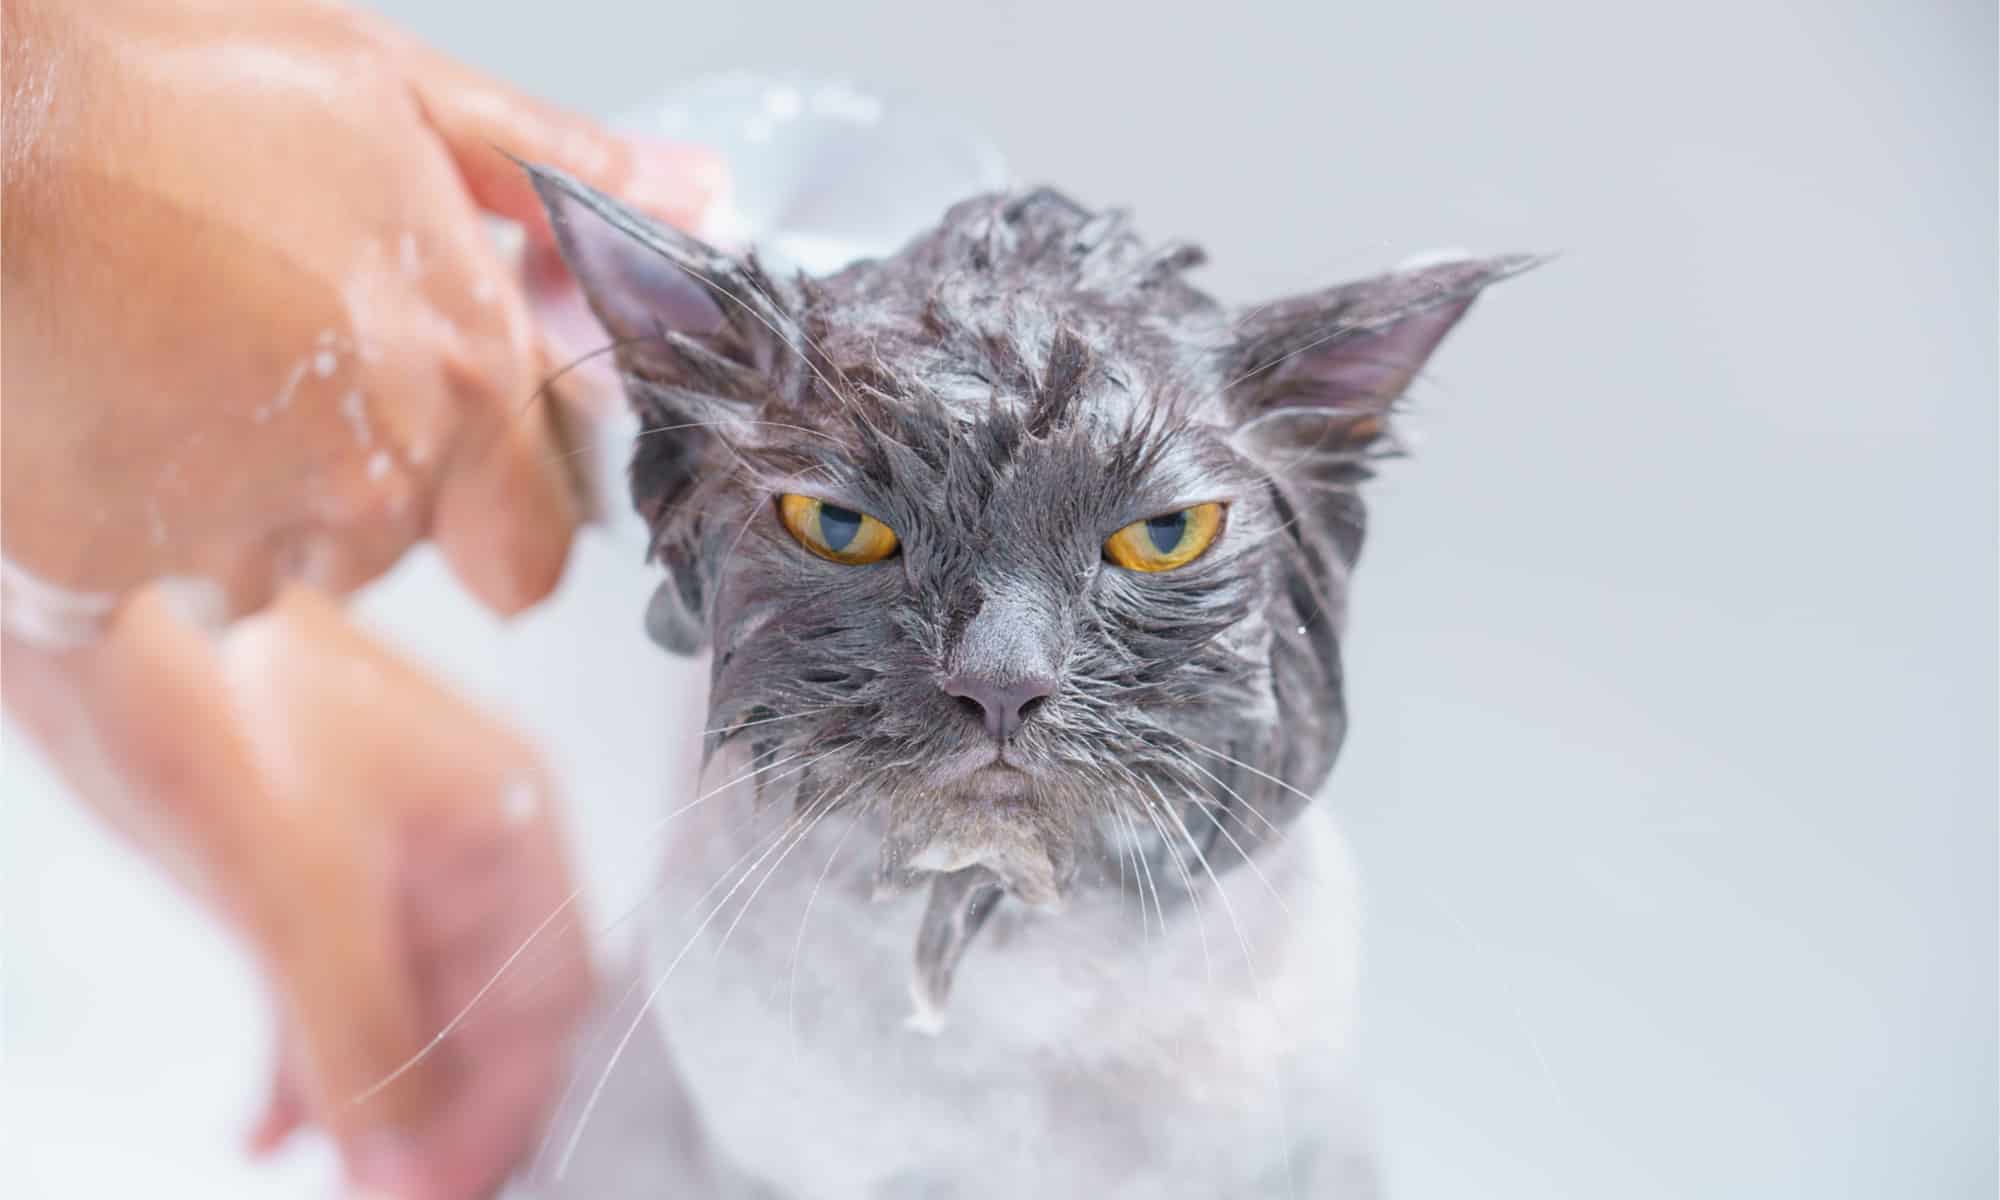 Angry grey cat with amber eyes getting a bath